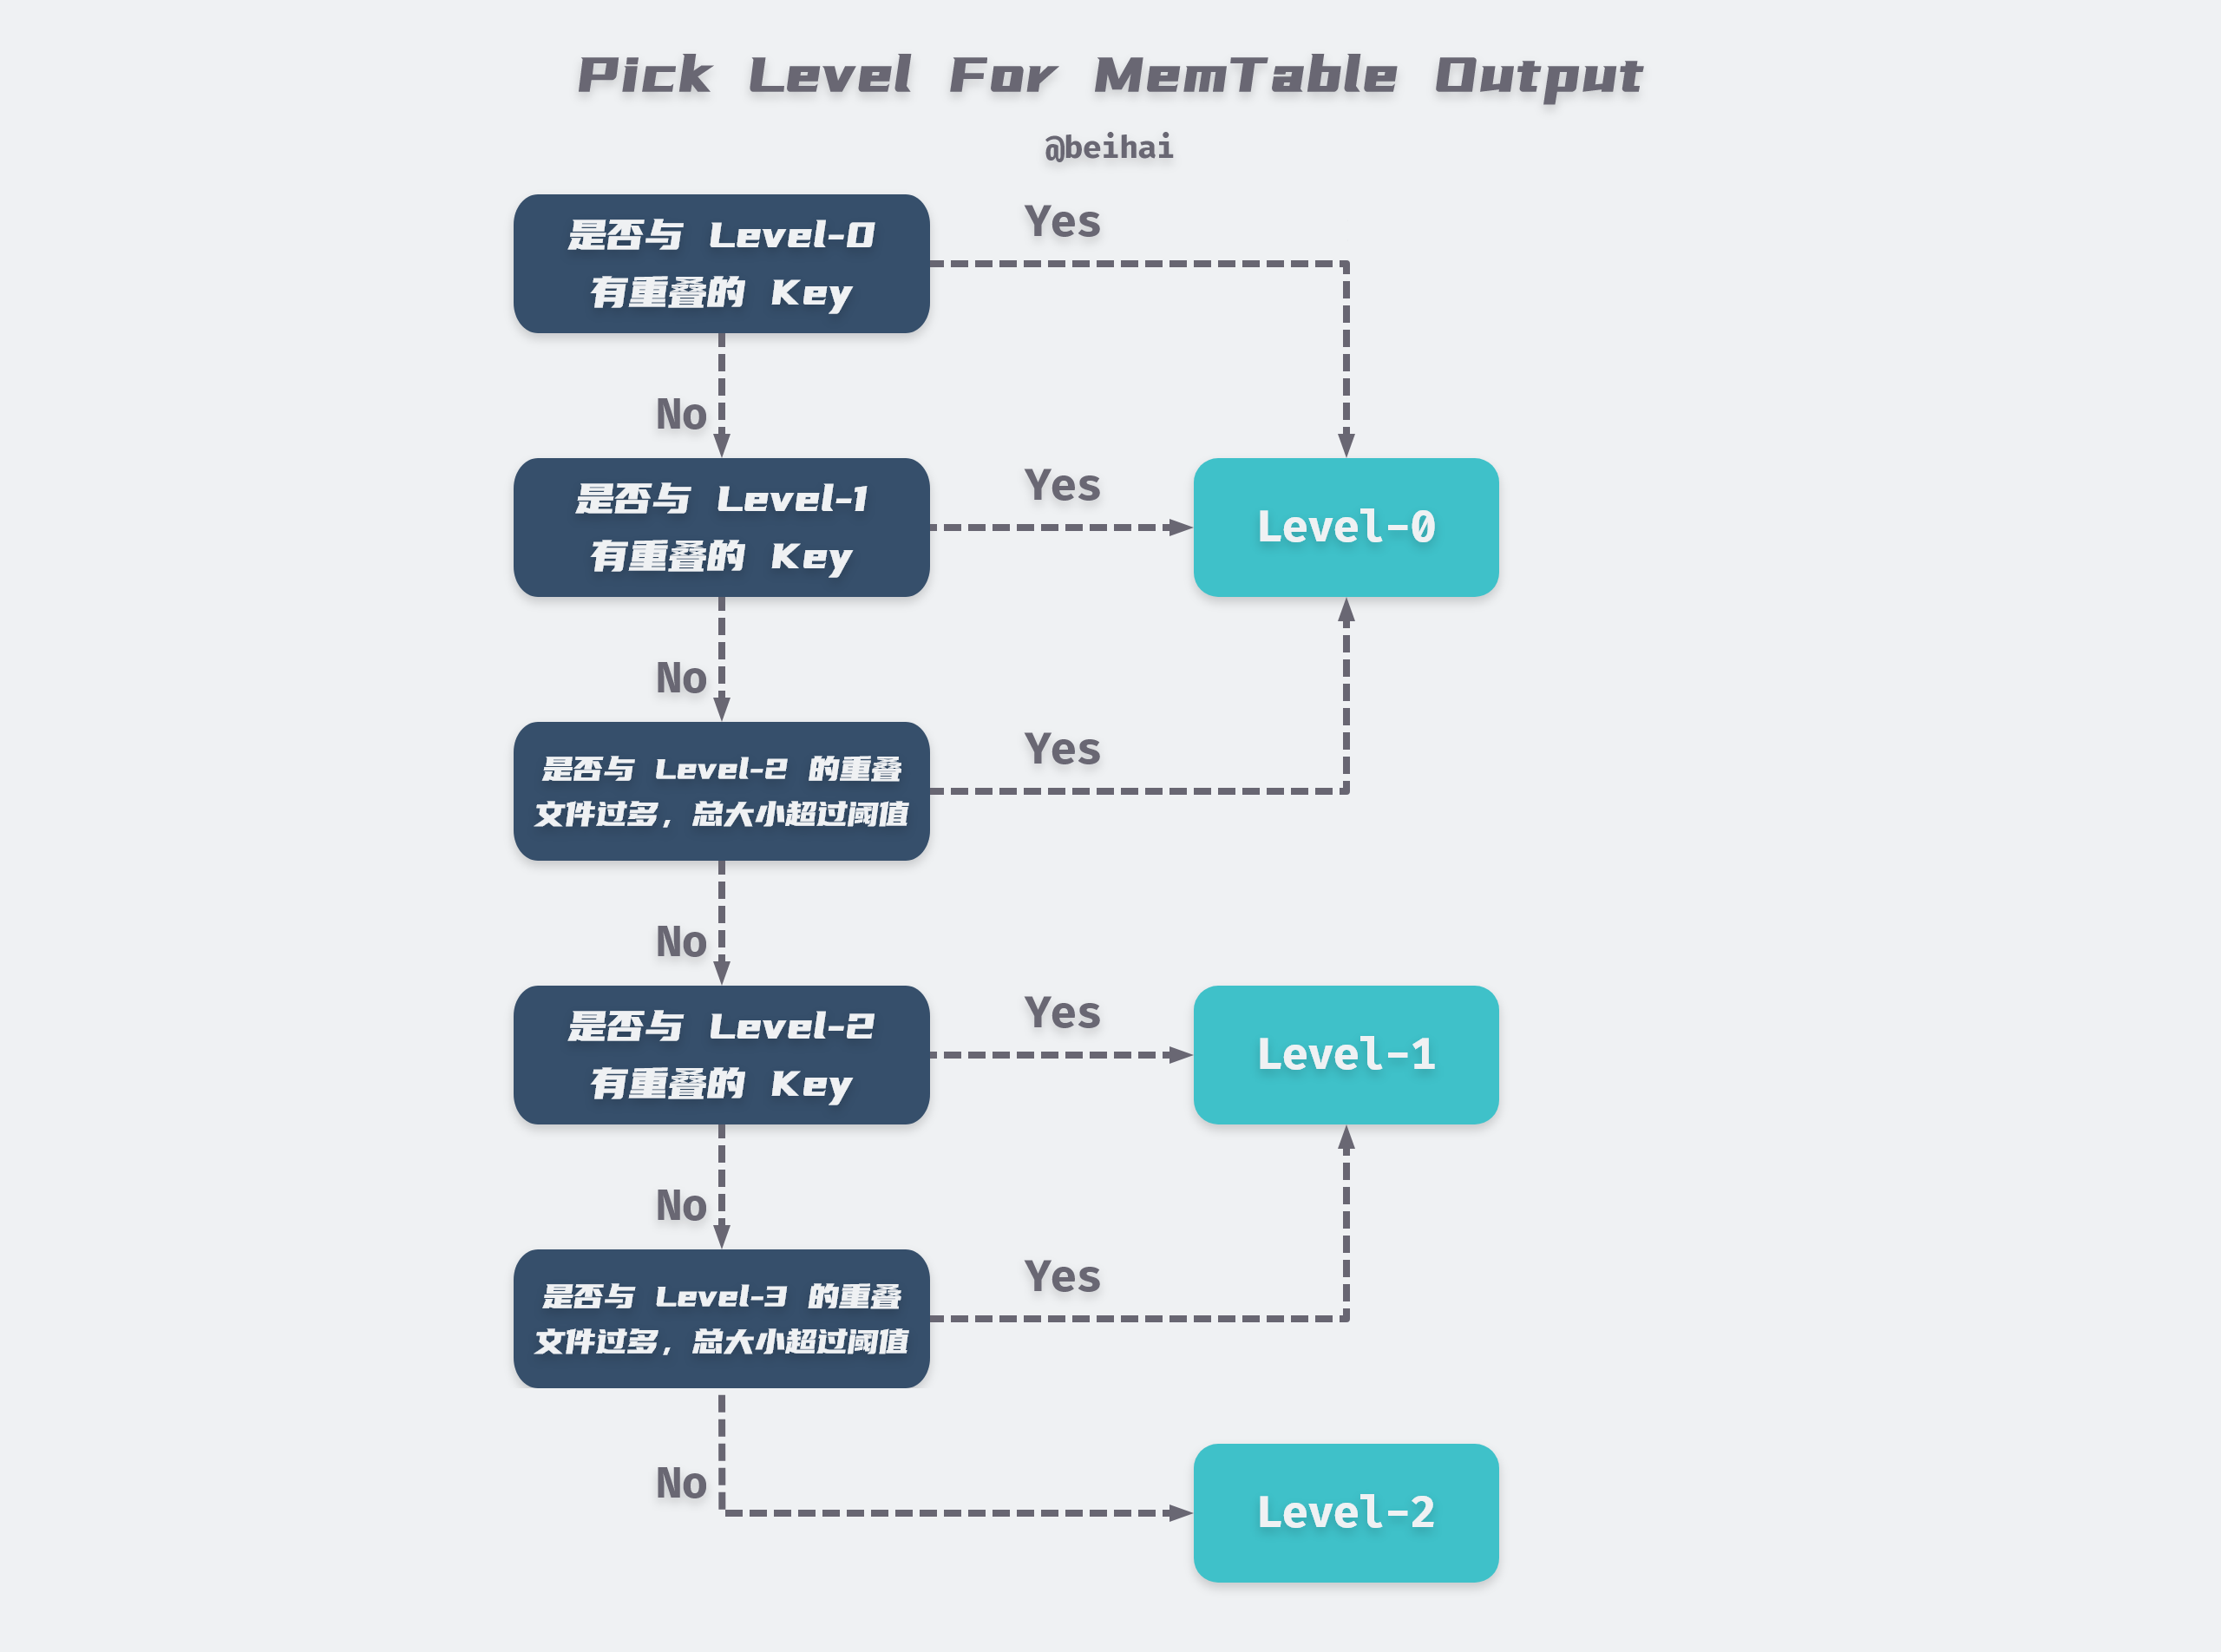 Pick level for memtable outout